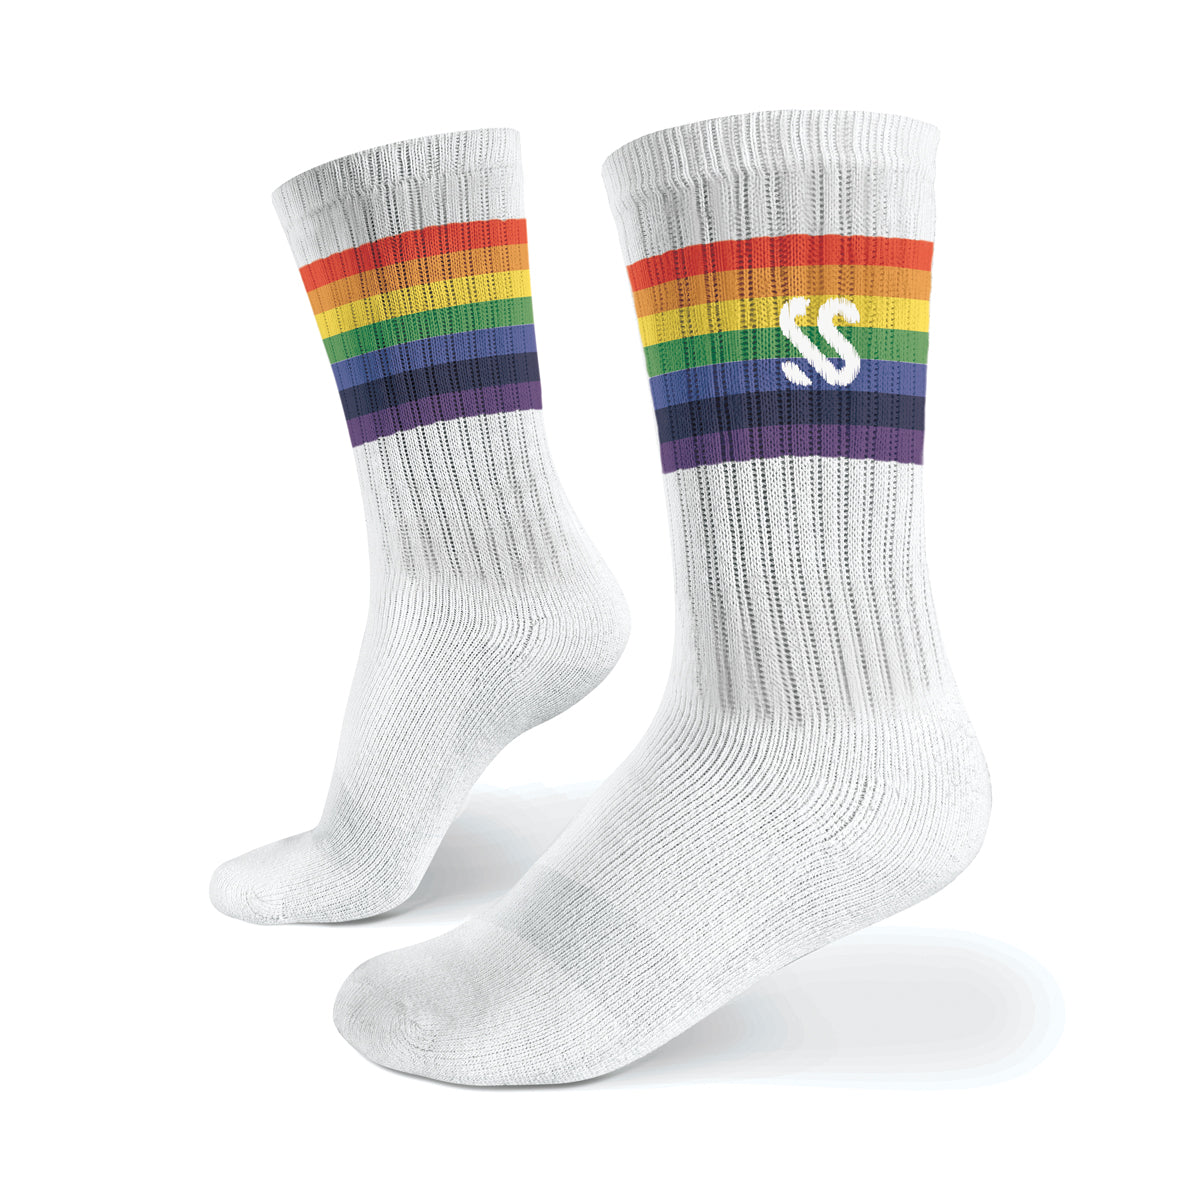 A pair of white combed cotton socks with a rainbow band